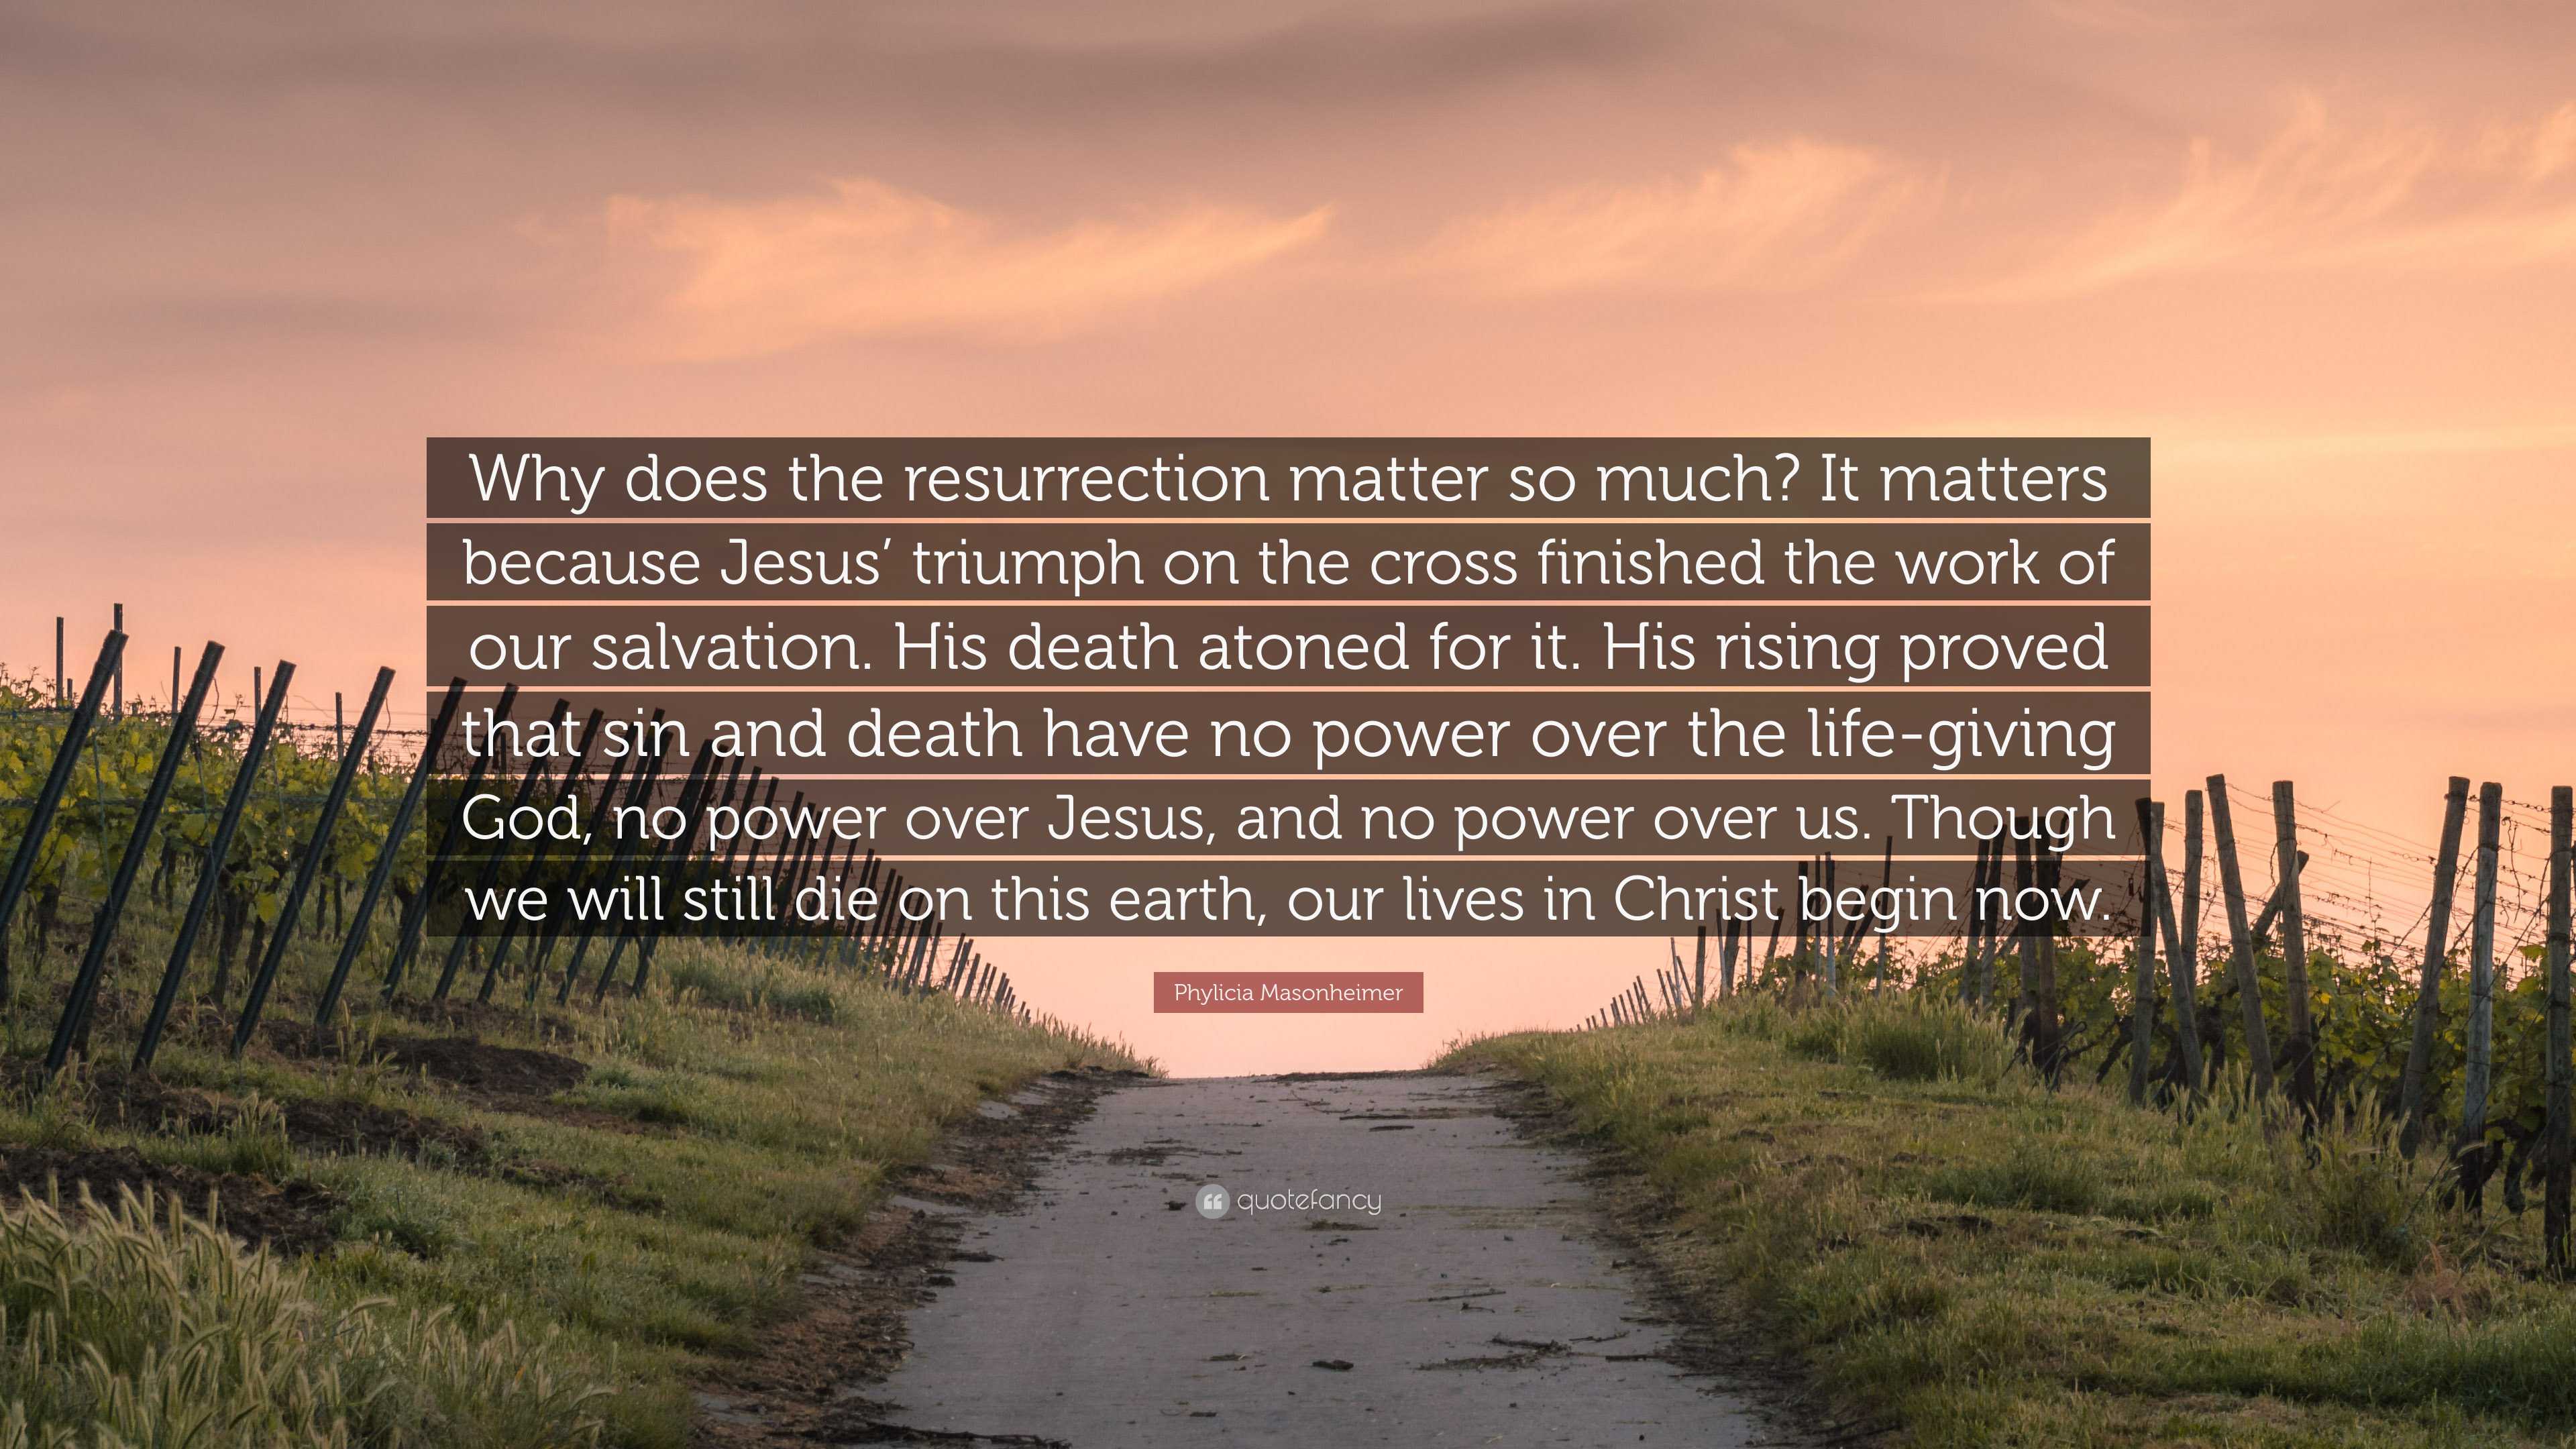 Phylicia Masonheimer Quote: “Why does the resurrection matter so much? It  matters because Jesus' triumph on the cross finished the work of our  salvat...”